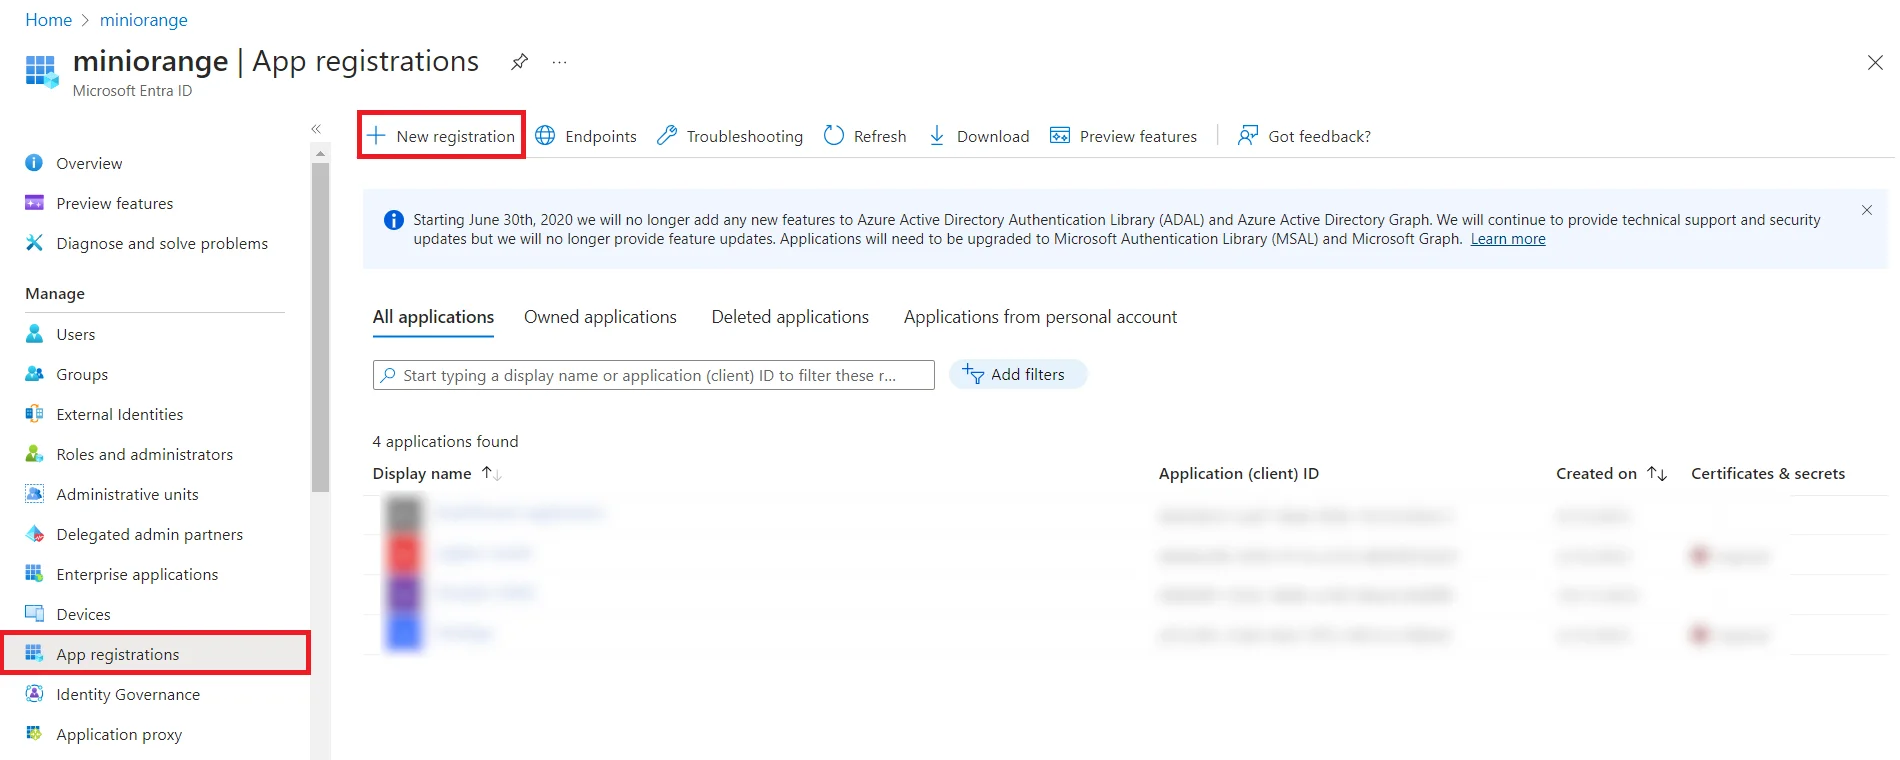 nopCommerce OAuth Single Sign-On (SSO) using Azure AD (Microsoft Entra ID) as IDP - App-Registration